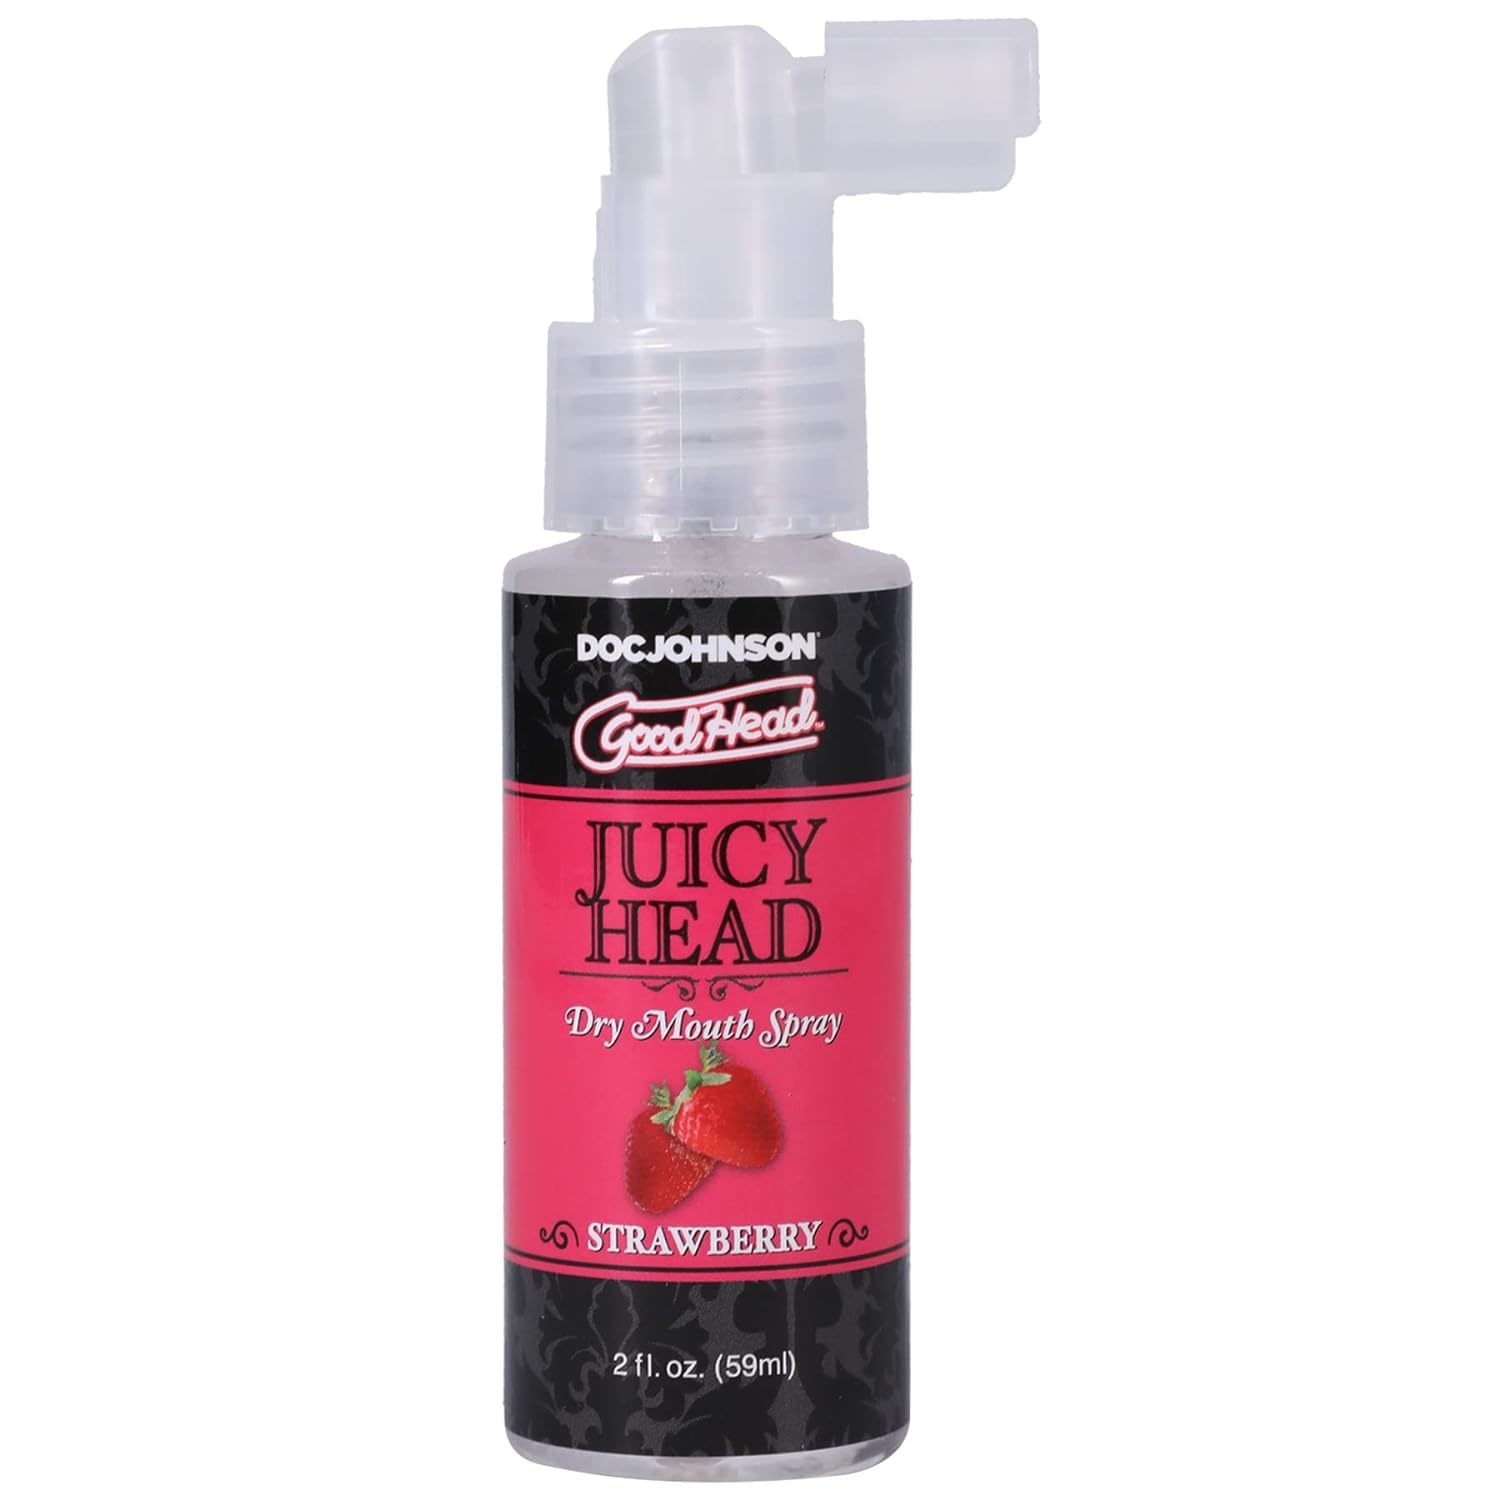 Goodhead - Wet Head - Dry Mouth Spray - Instantly Moisturize Your Mouth - Sweet  - $28.99